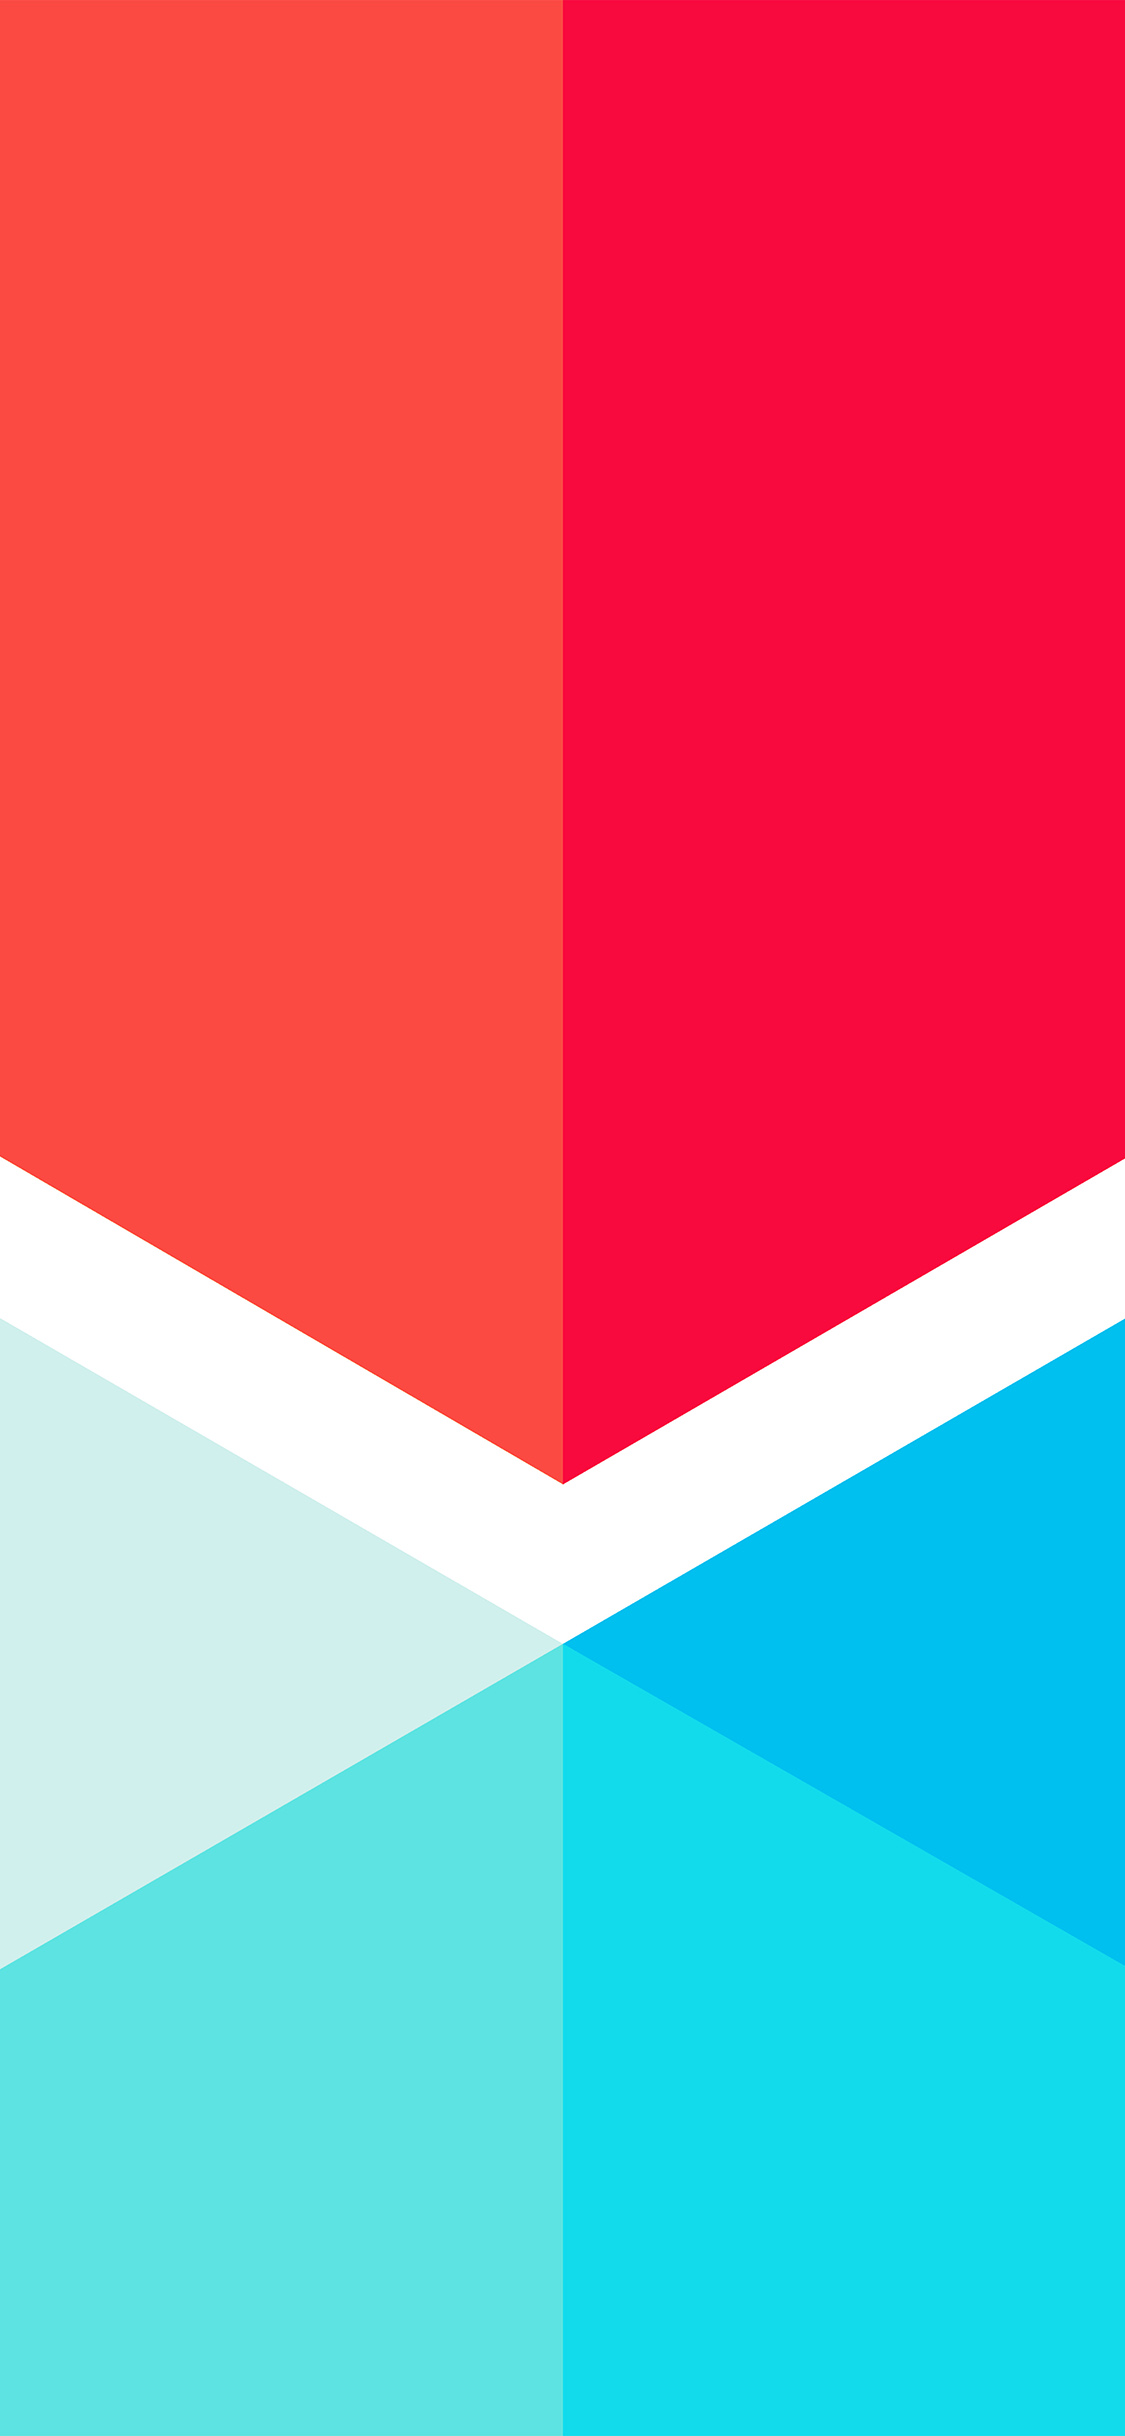 iPhone X wallpaper. polymail red blue by roccoeddy abstract pattern